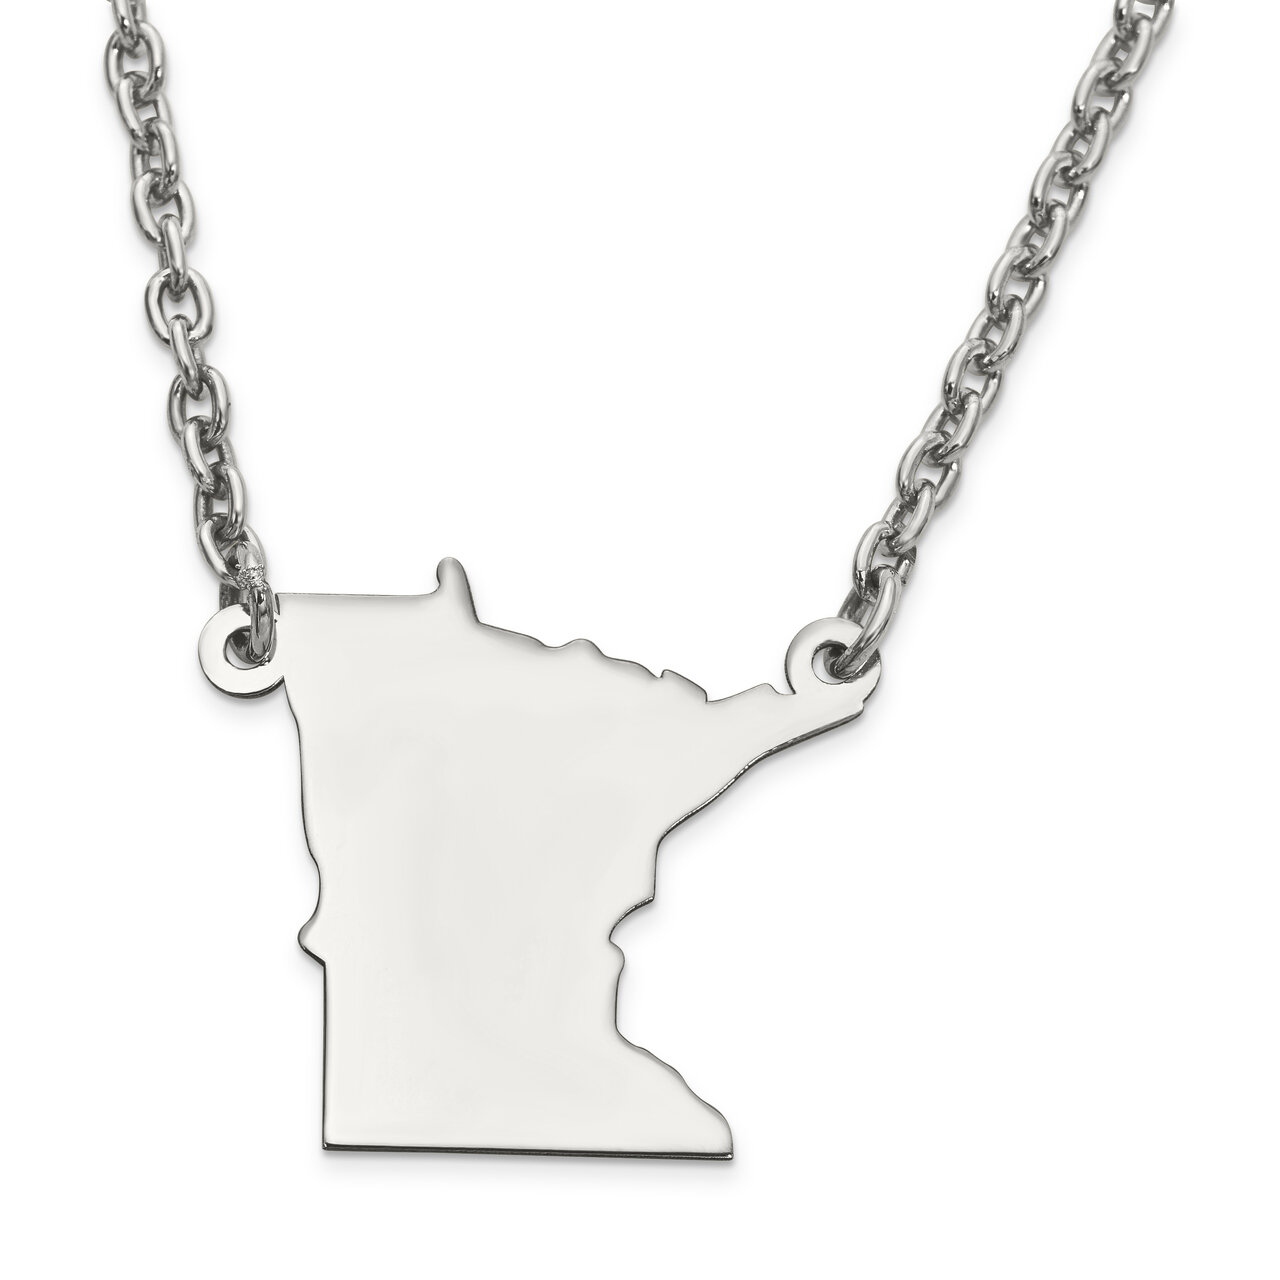 Minnesota State Pendant Necklace with Chain Sterling Silver Engravable XNA706SS-MN